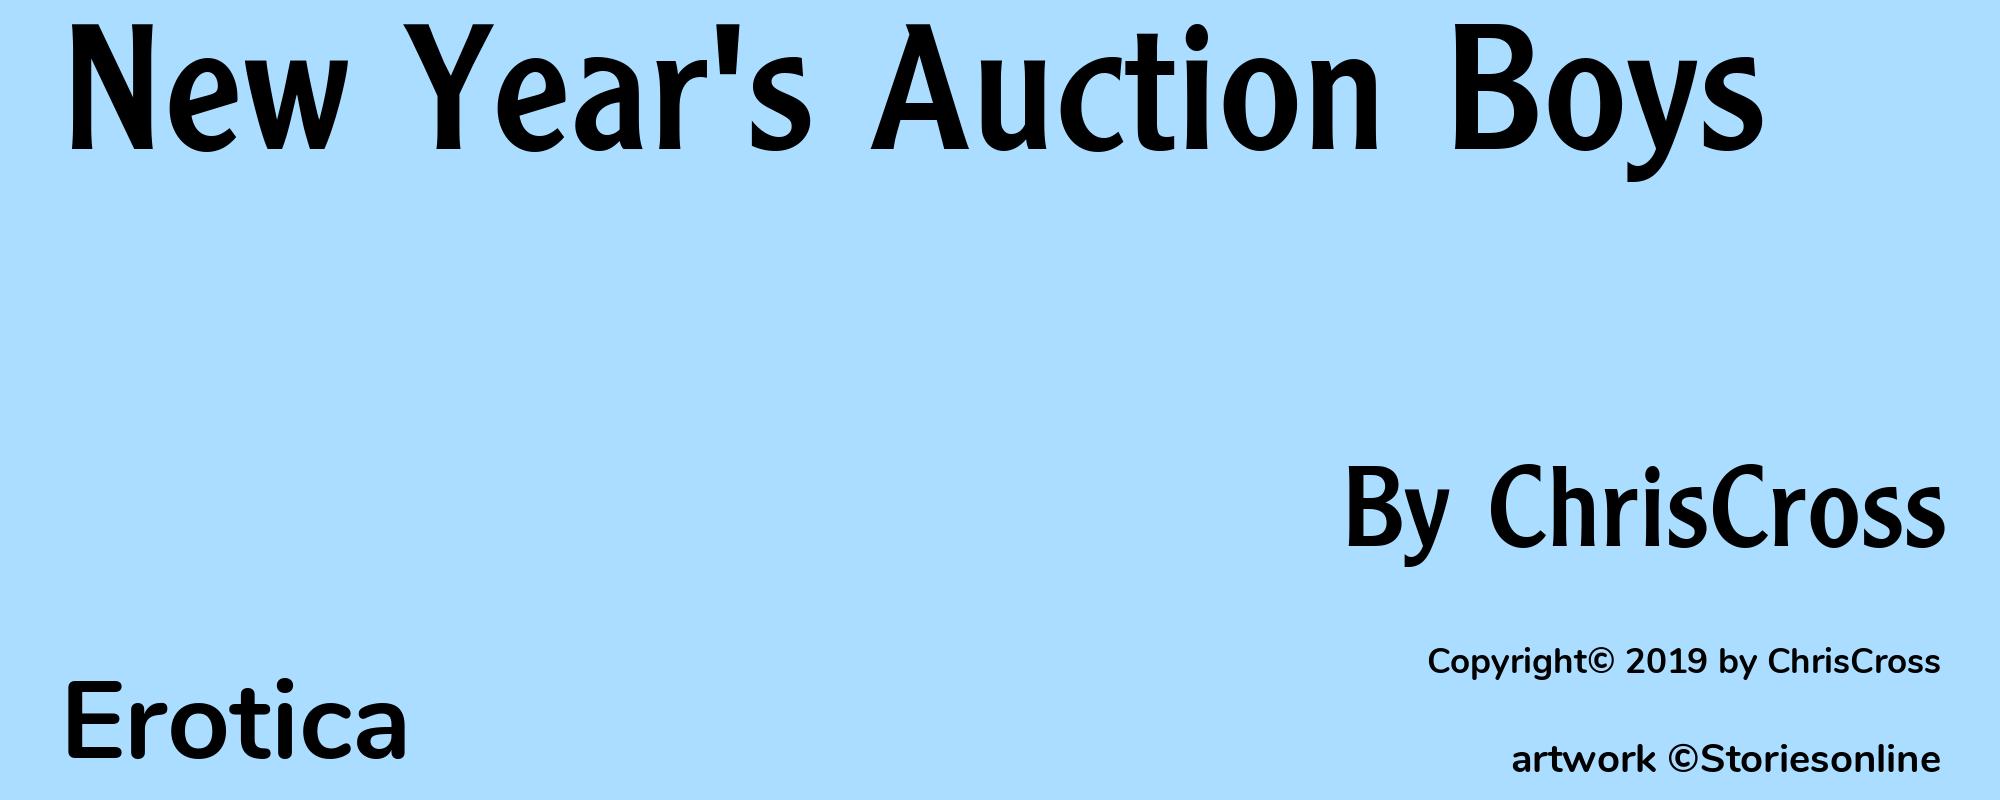 New Year's Auction Boys - Cover